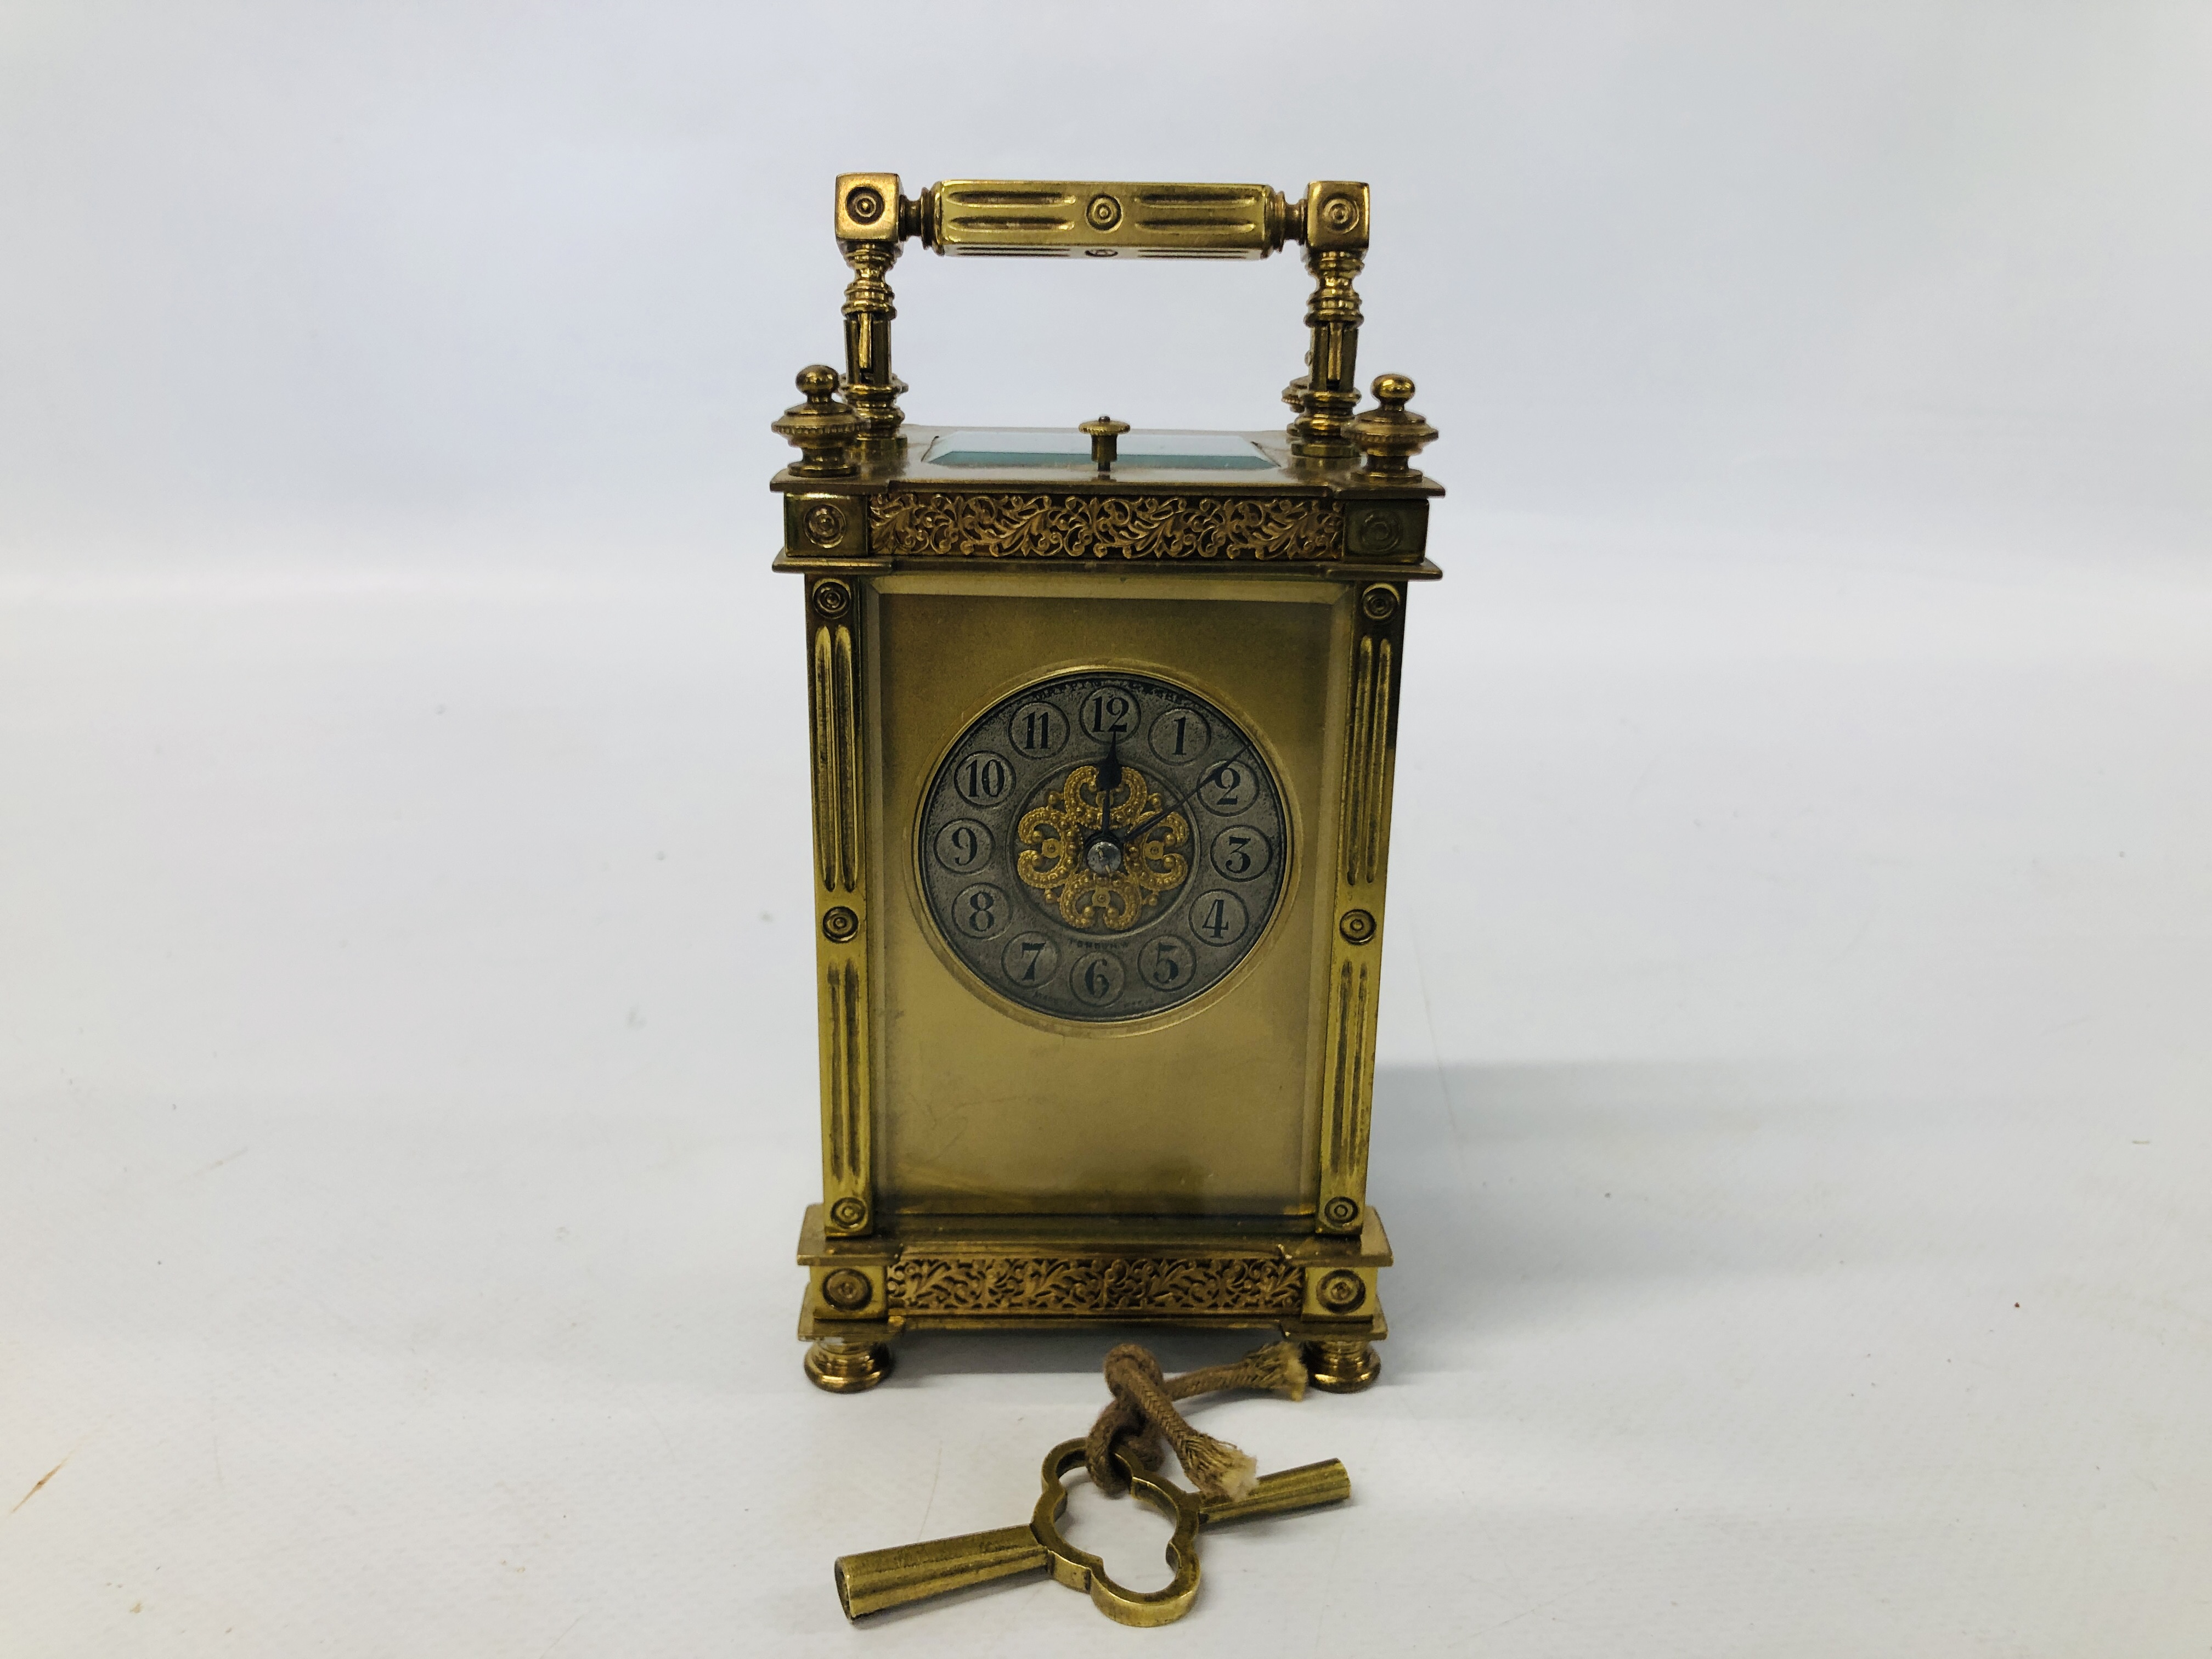 A FRENCH CARRIAGE CLOCK RETAILED BY MAPPIN & WEBB, THE SILVERED CHAPTER RING WITH ENGLISH NUMERALS,